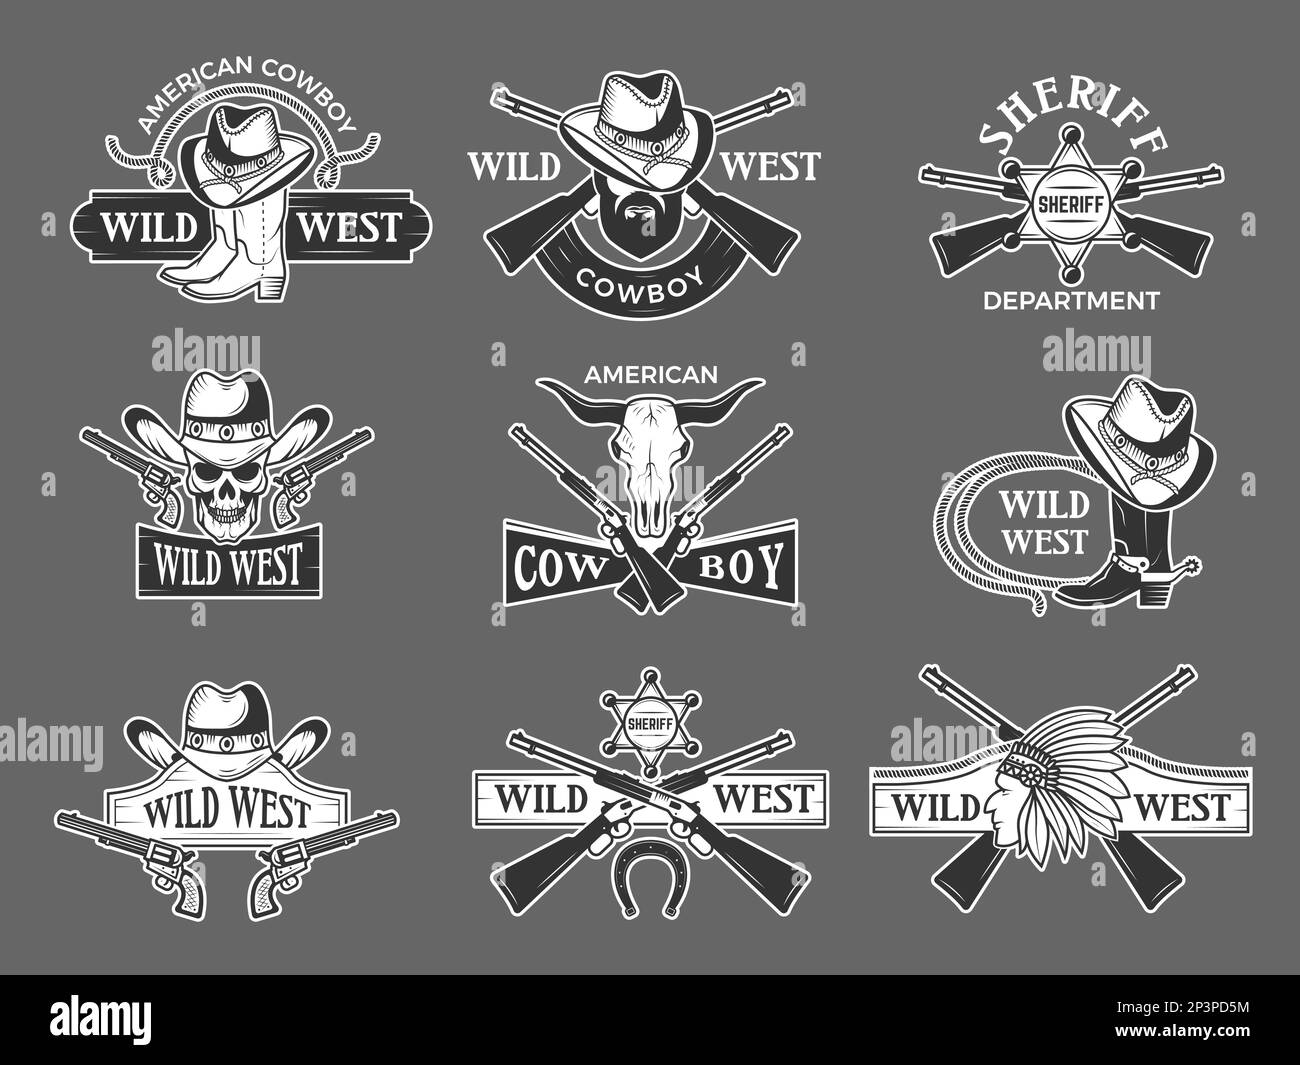 Wild west logo. Sheriff retro symbols collection recent vector wild west pictures with place for text Stock Vector